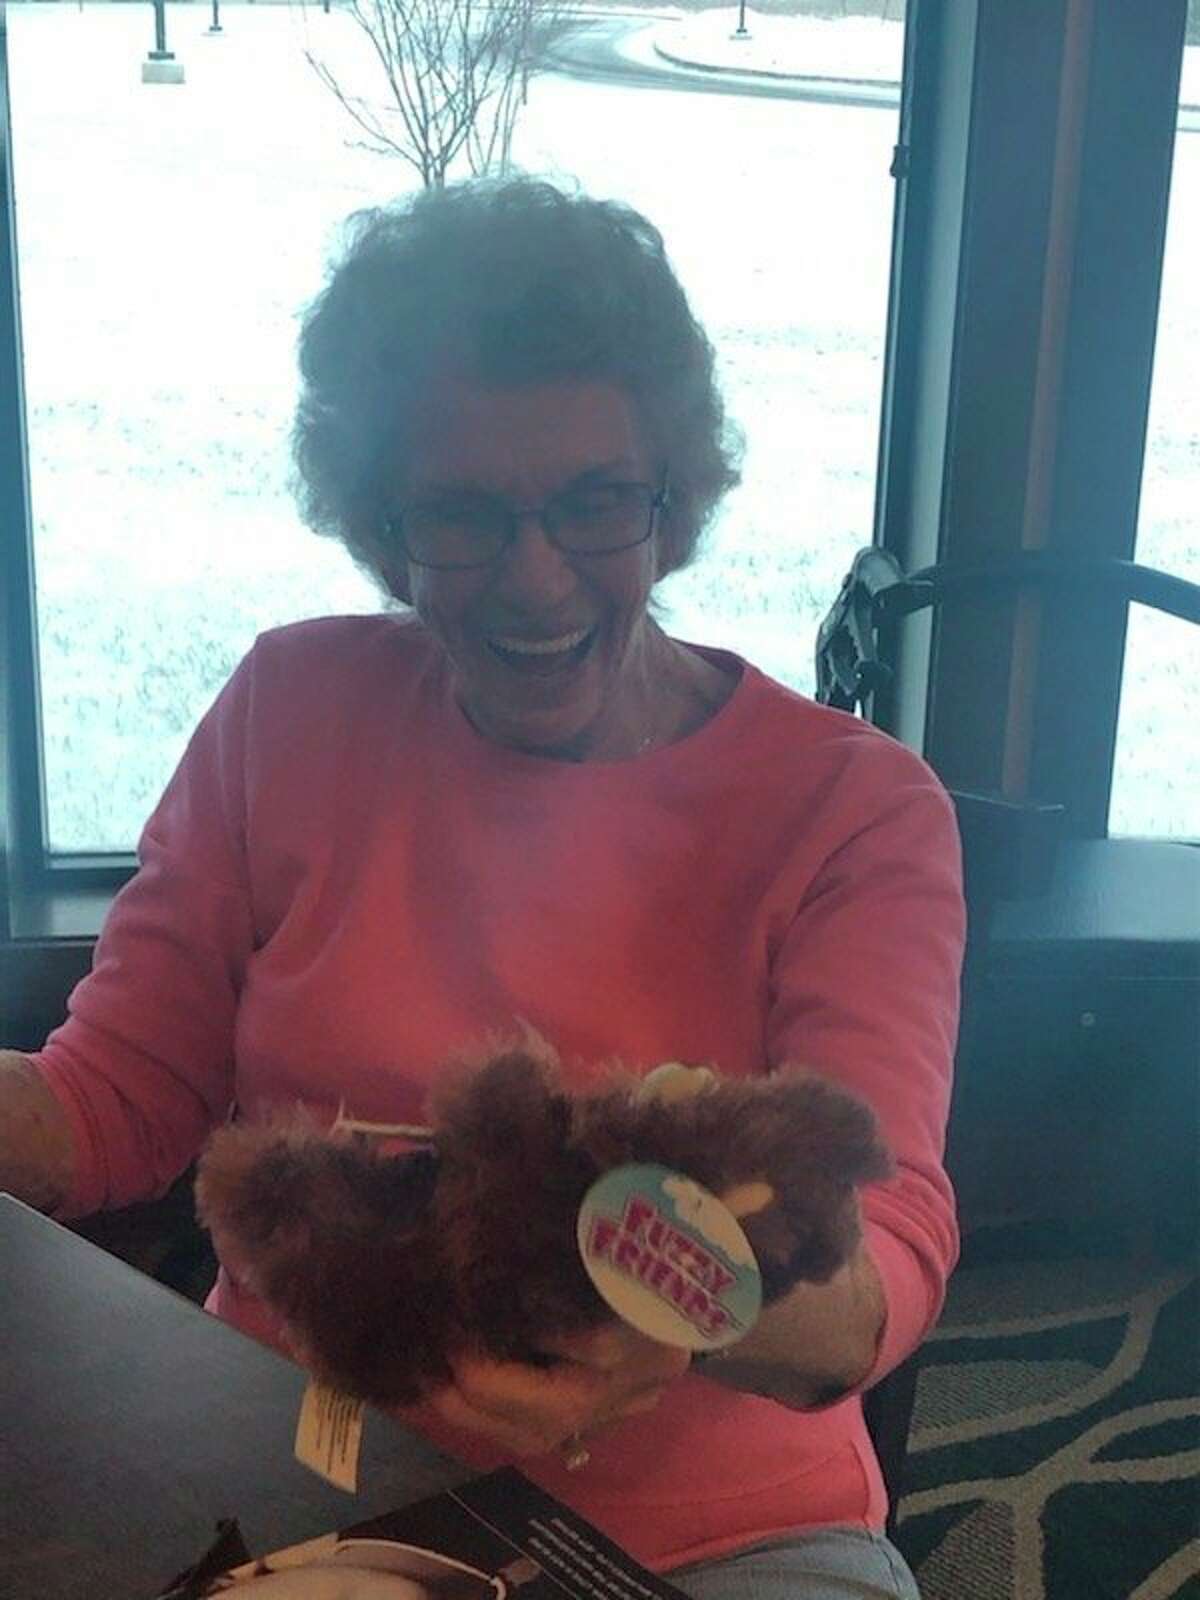 Members of the Salvation Army's after school program surprised residents of Primrose with stuffed animals in a recent visit. (Photo provided)